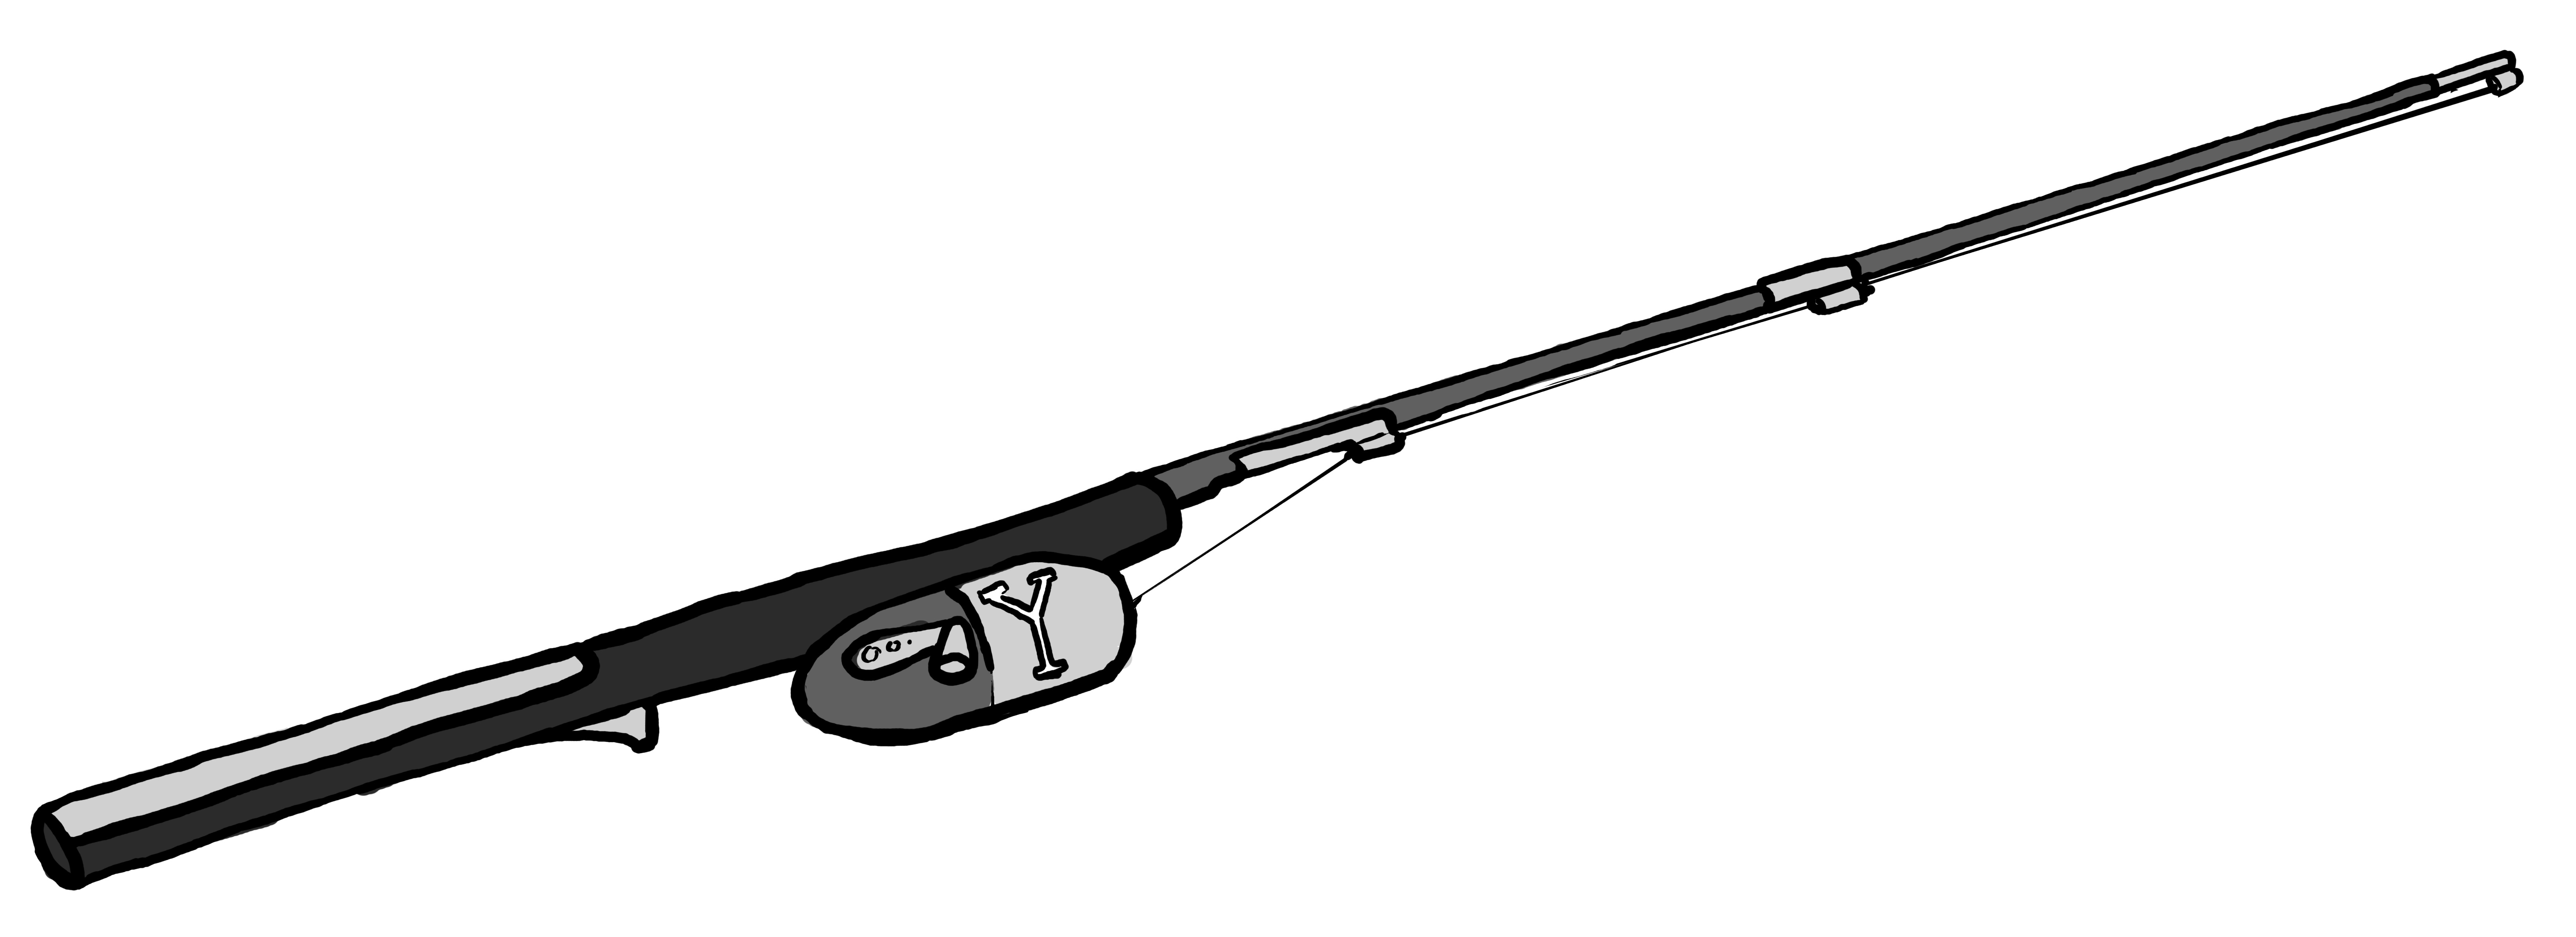 Picture Of A Fishing Pole | Free Download Clip Art | Free Clip Art ...